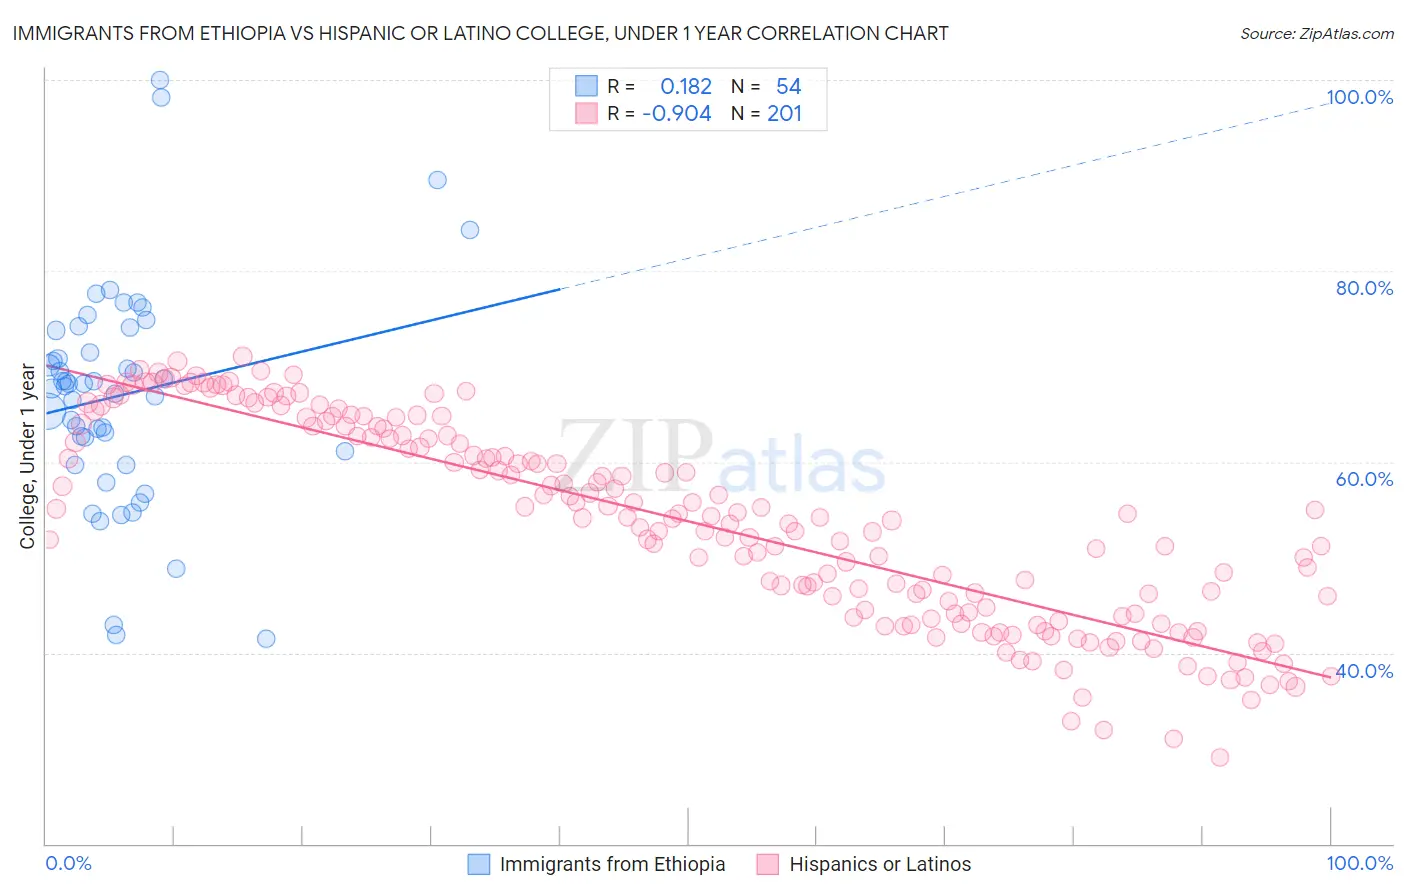 Immigrants from Ethiopia vs Hispanic or Latino College, Under 1 year